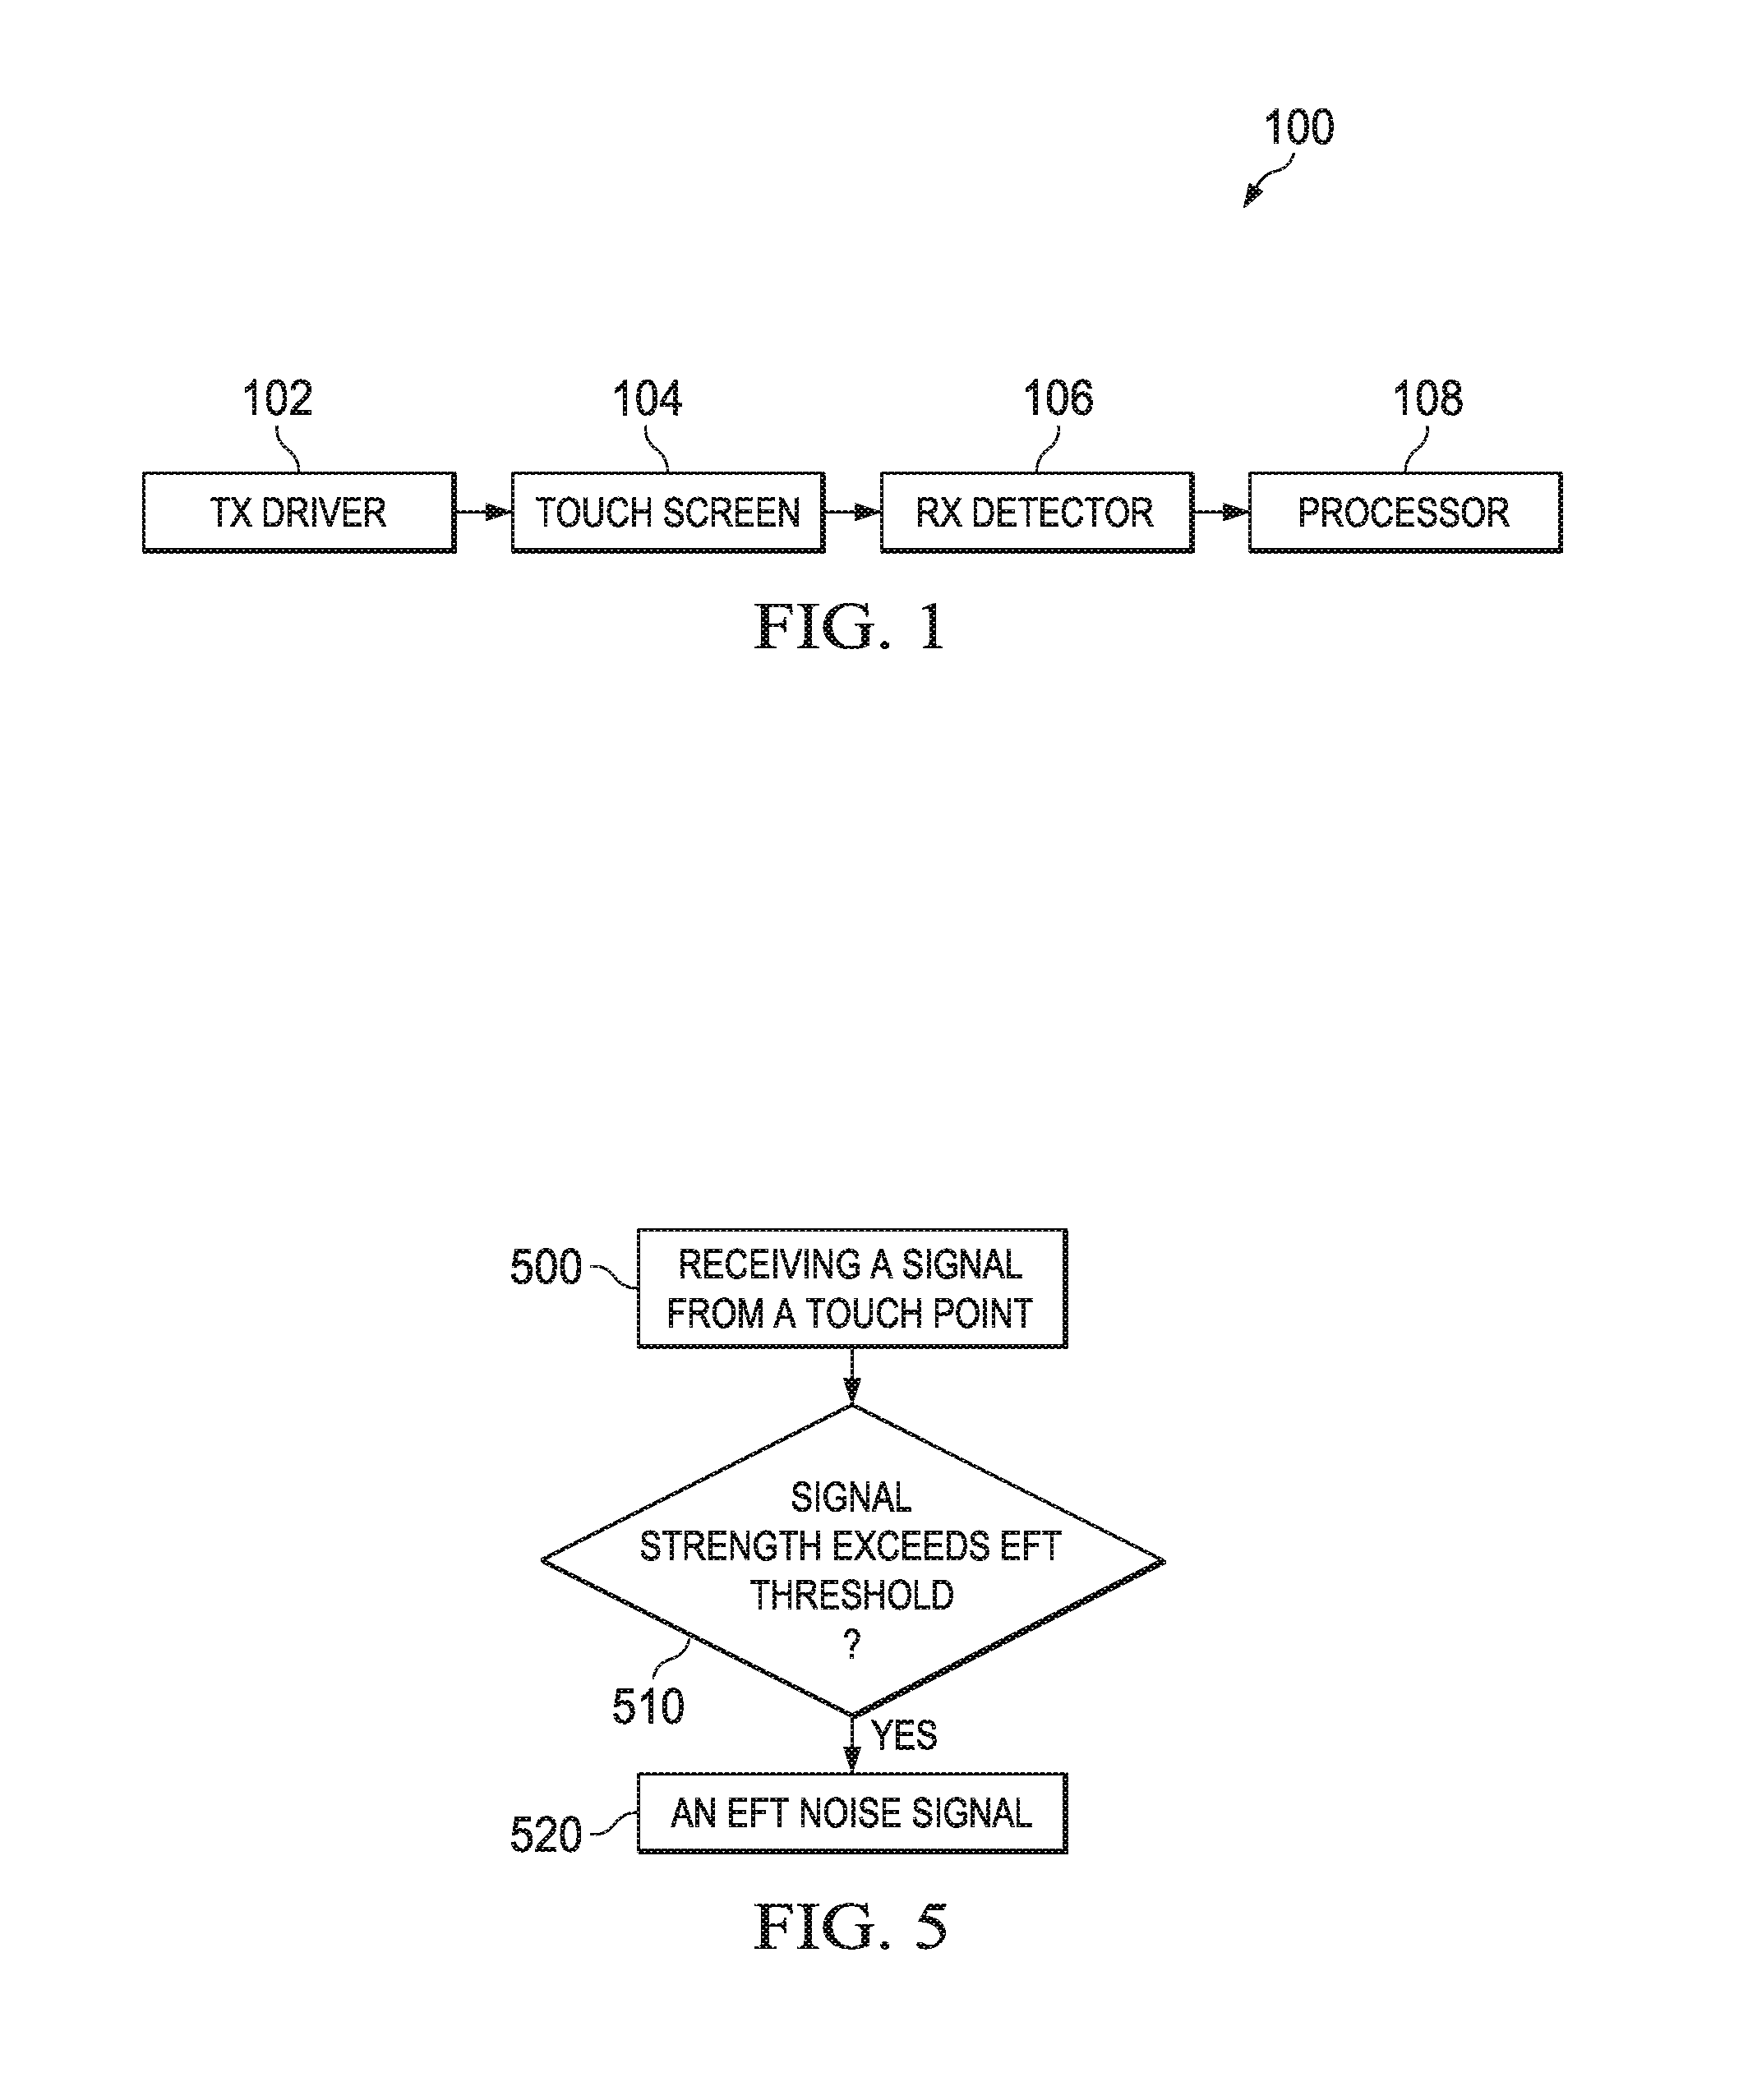 Apparatus and Method for Preventing False Touches in Touch Screen Systems